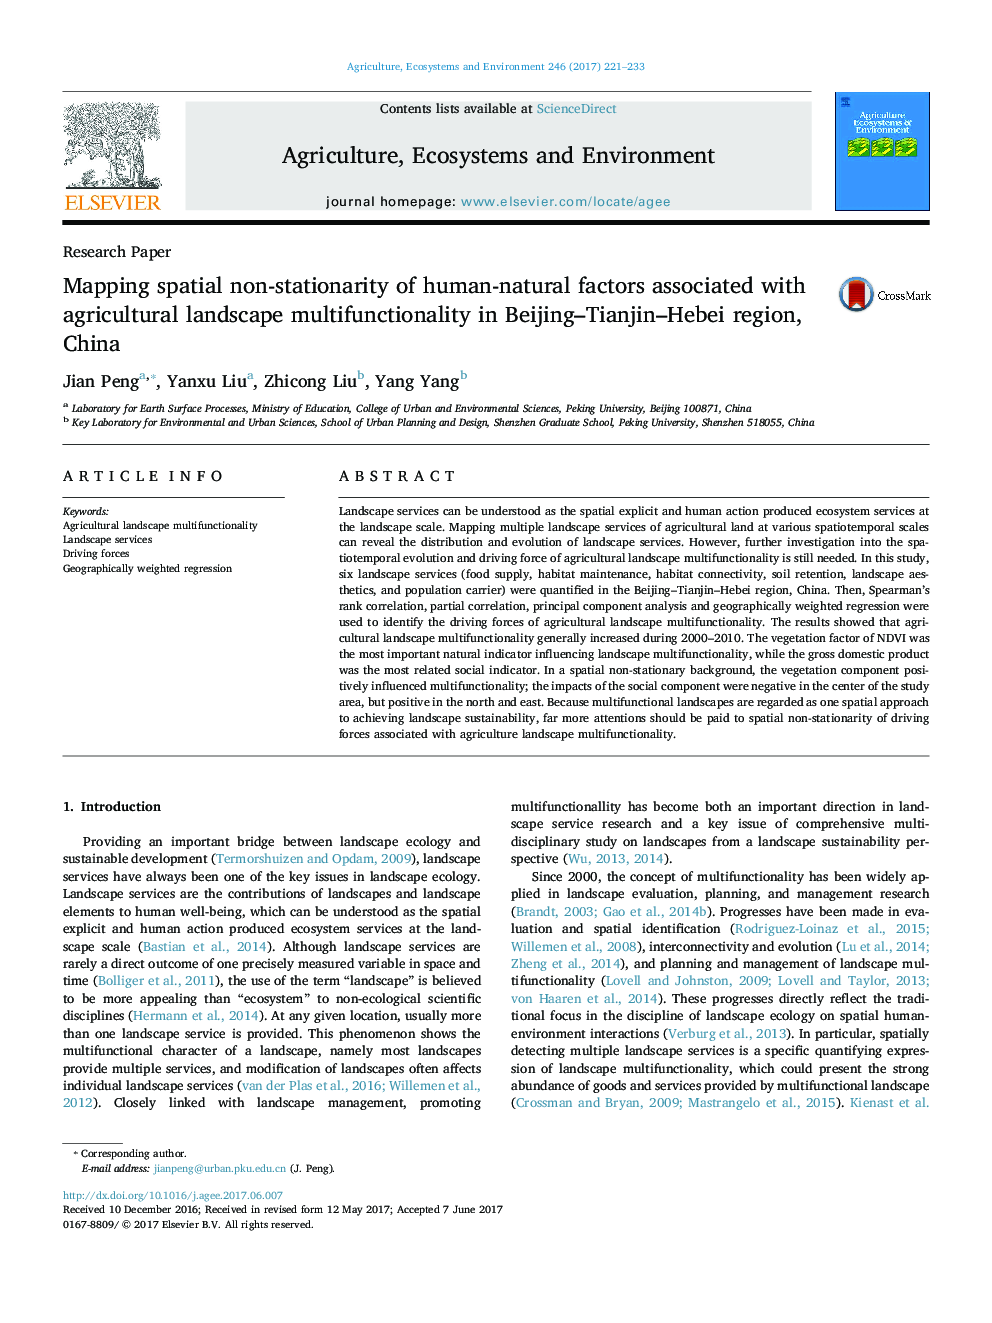 Mapping spatial non-stationarity of human-natural factors associated with agricultural landscape multifunctionality in Beijing-Tianjin-Hebei region, China